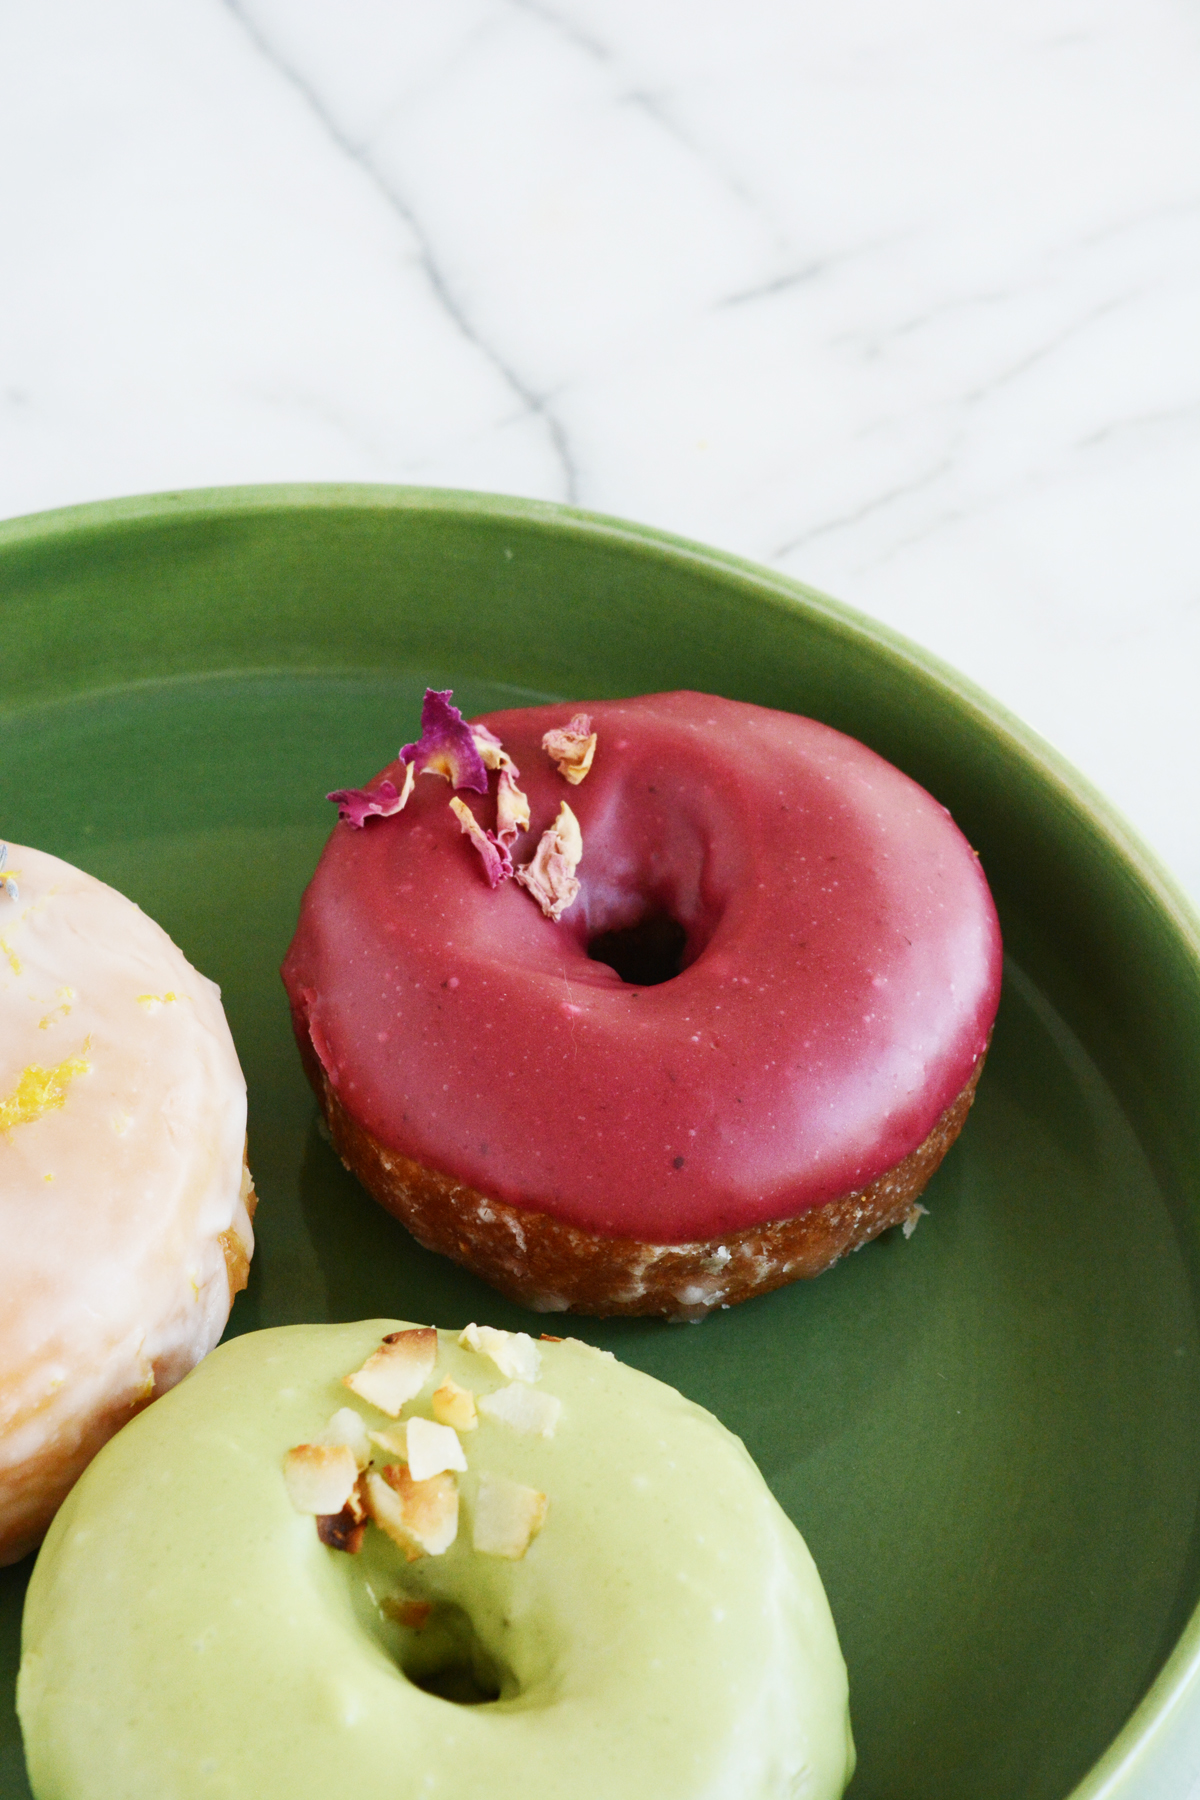 Faux Gourmet Donuts - give grocery store donuts a makeover with 3 yummy flavor combinations.